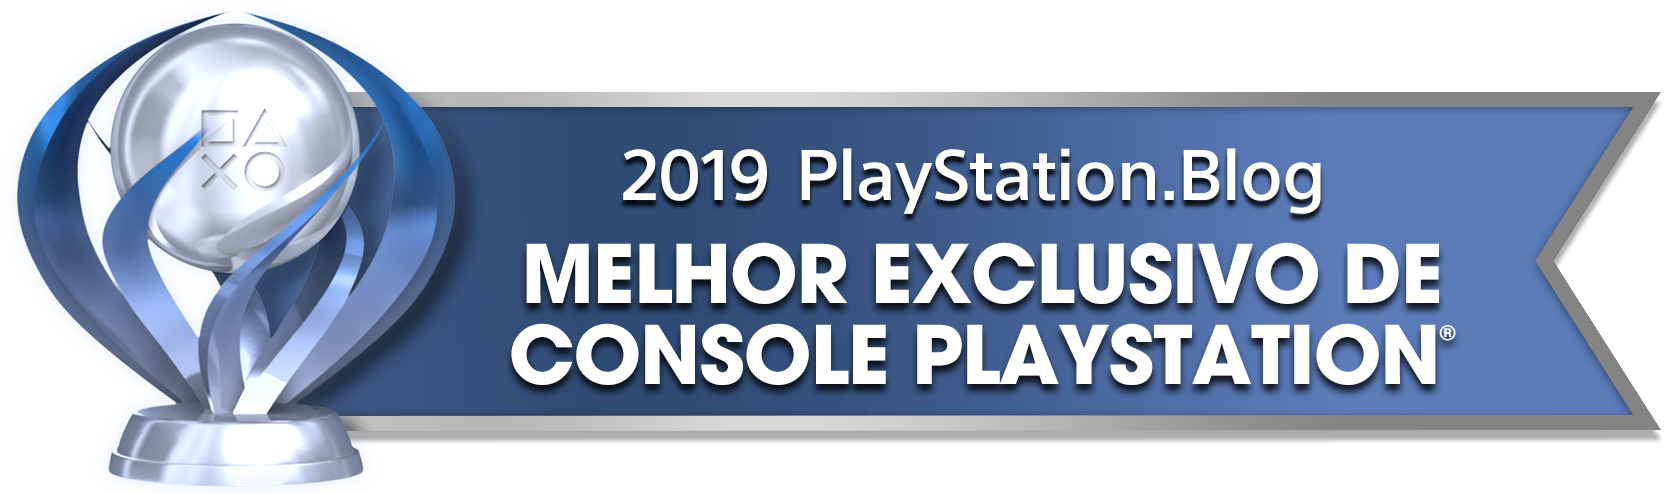 PS Blog Game of the Year 2019 - Best Console Exclusive - 1 - Platinum